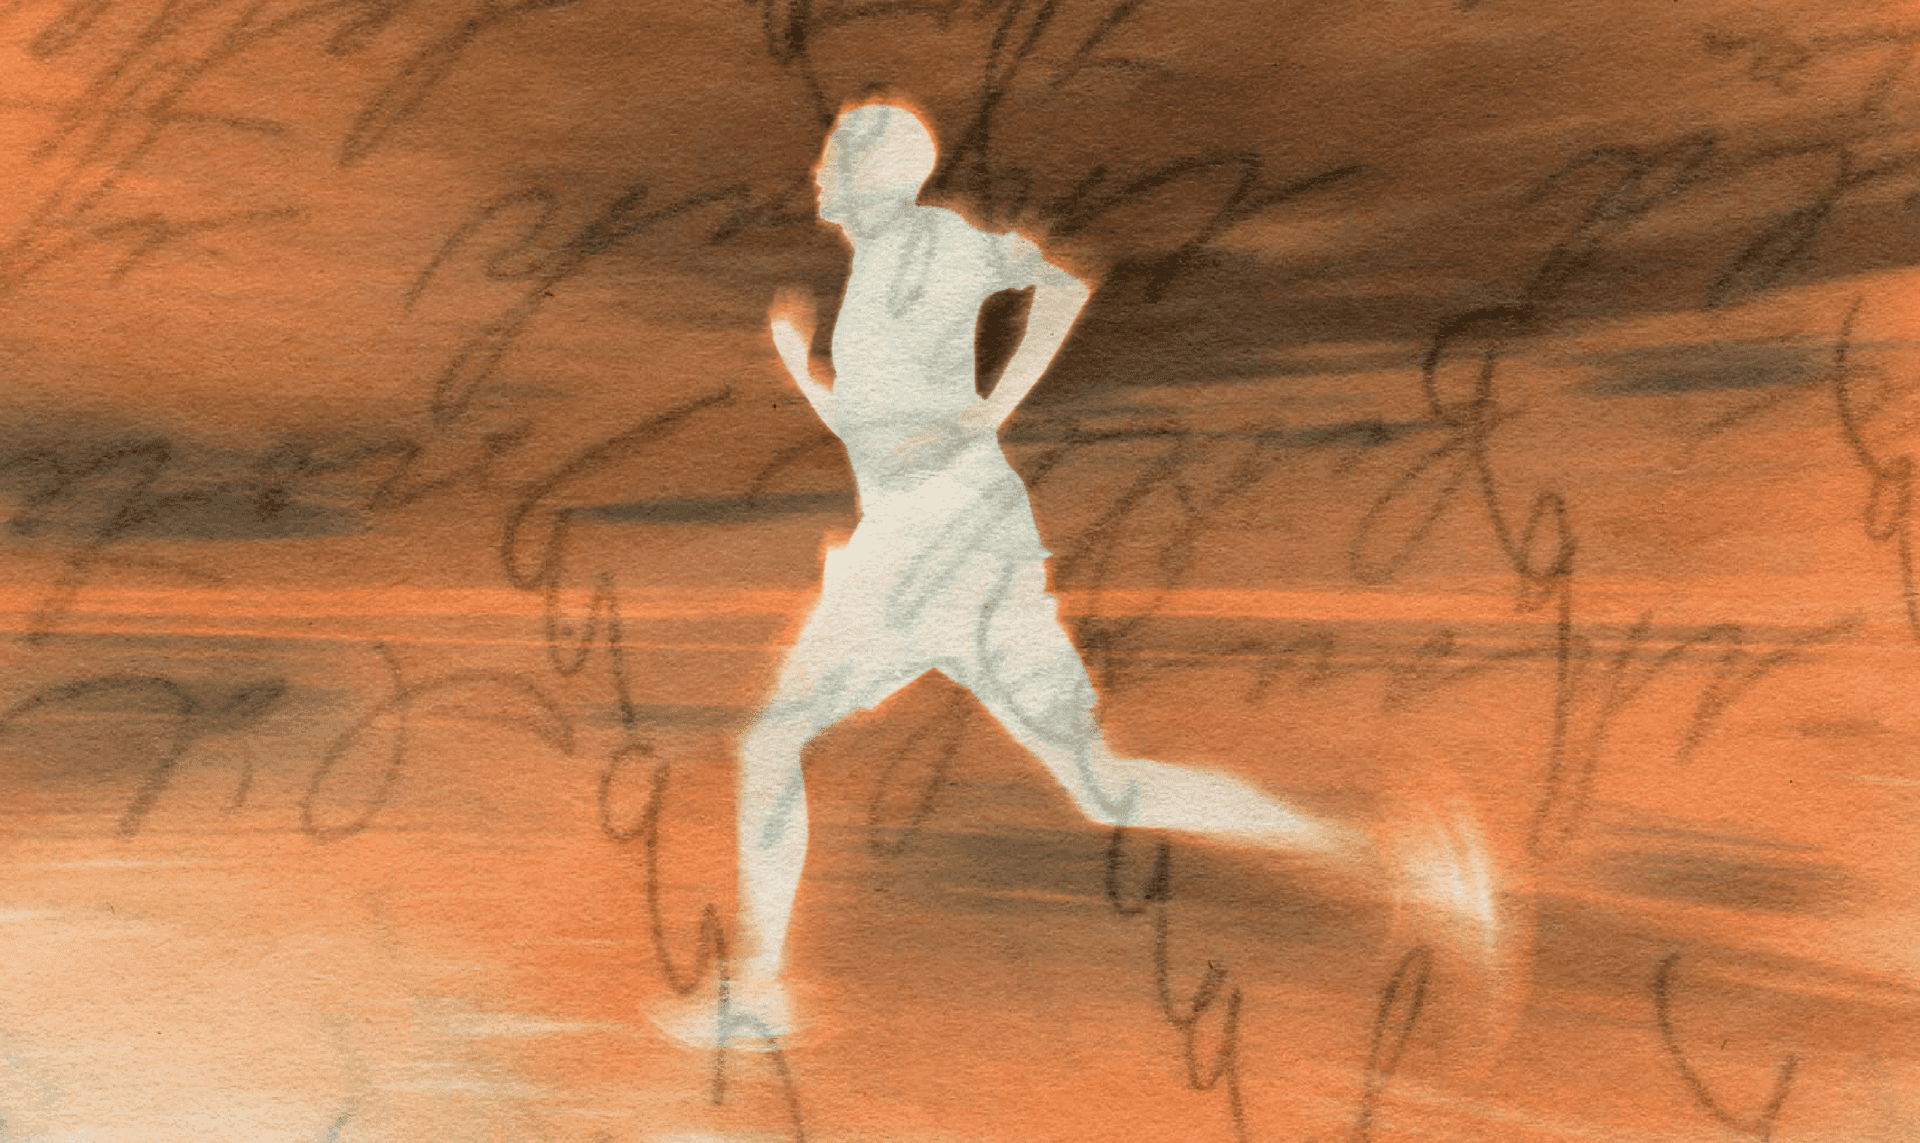 Abstract Runner Silhouette